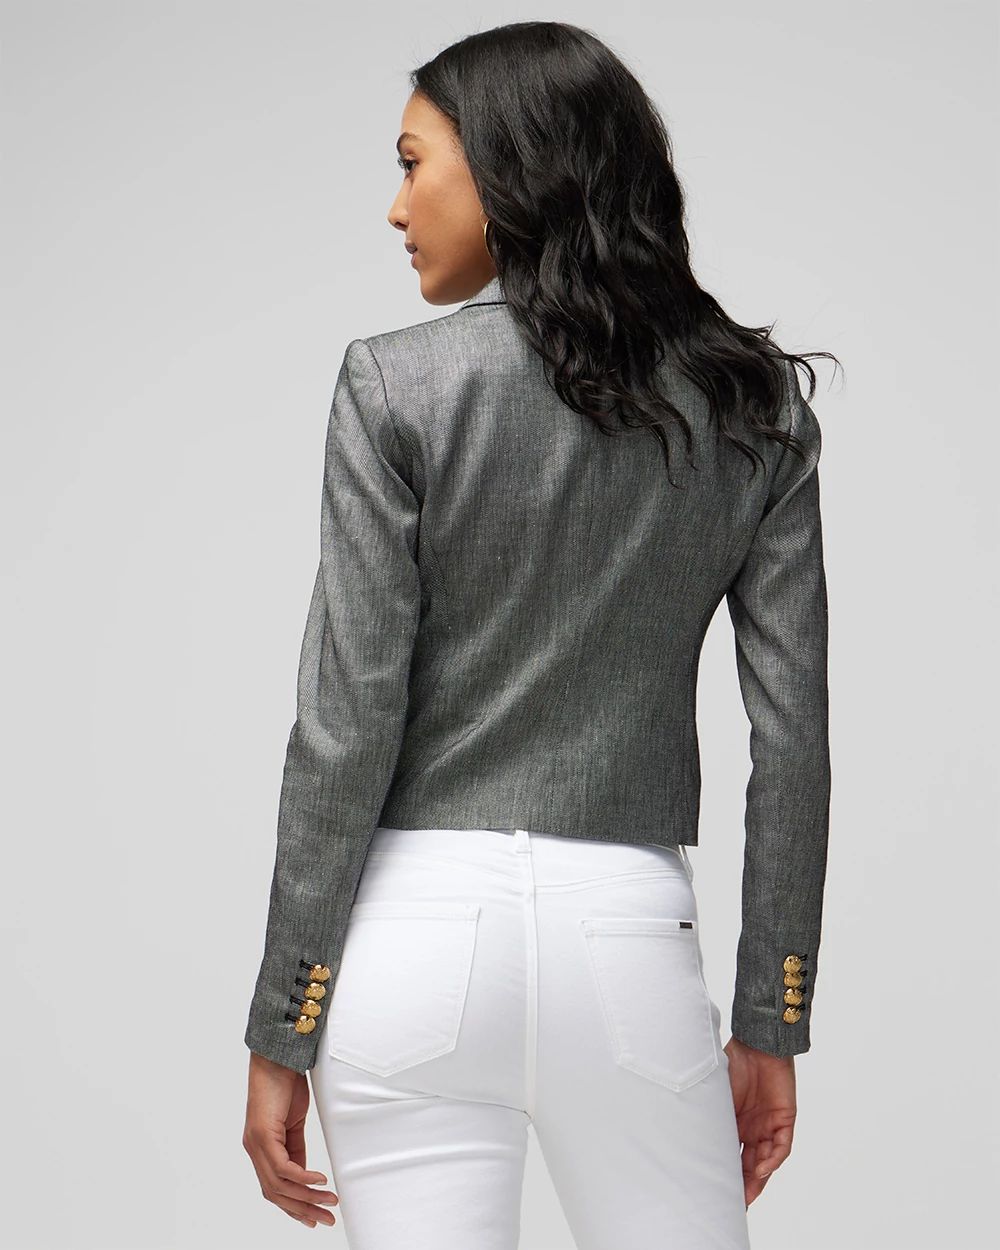 Cropped Linen-Blend Studio Blazer click to view larger image.